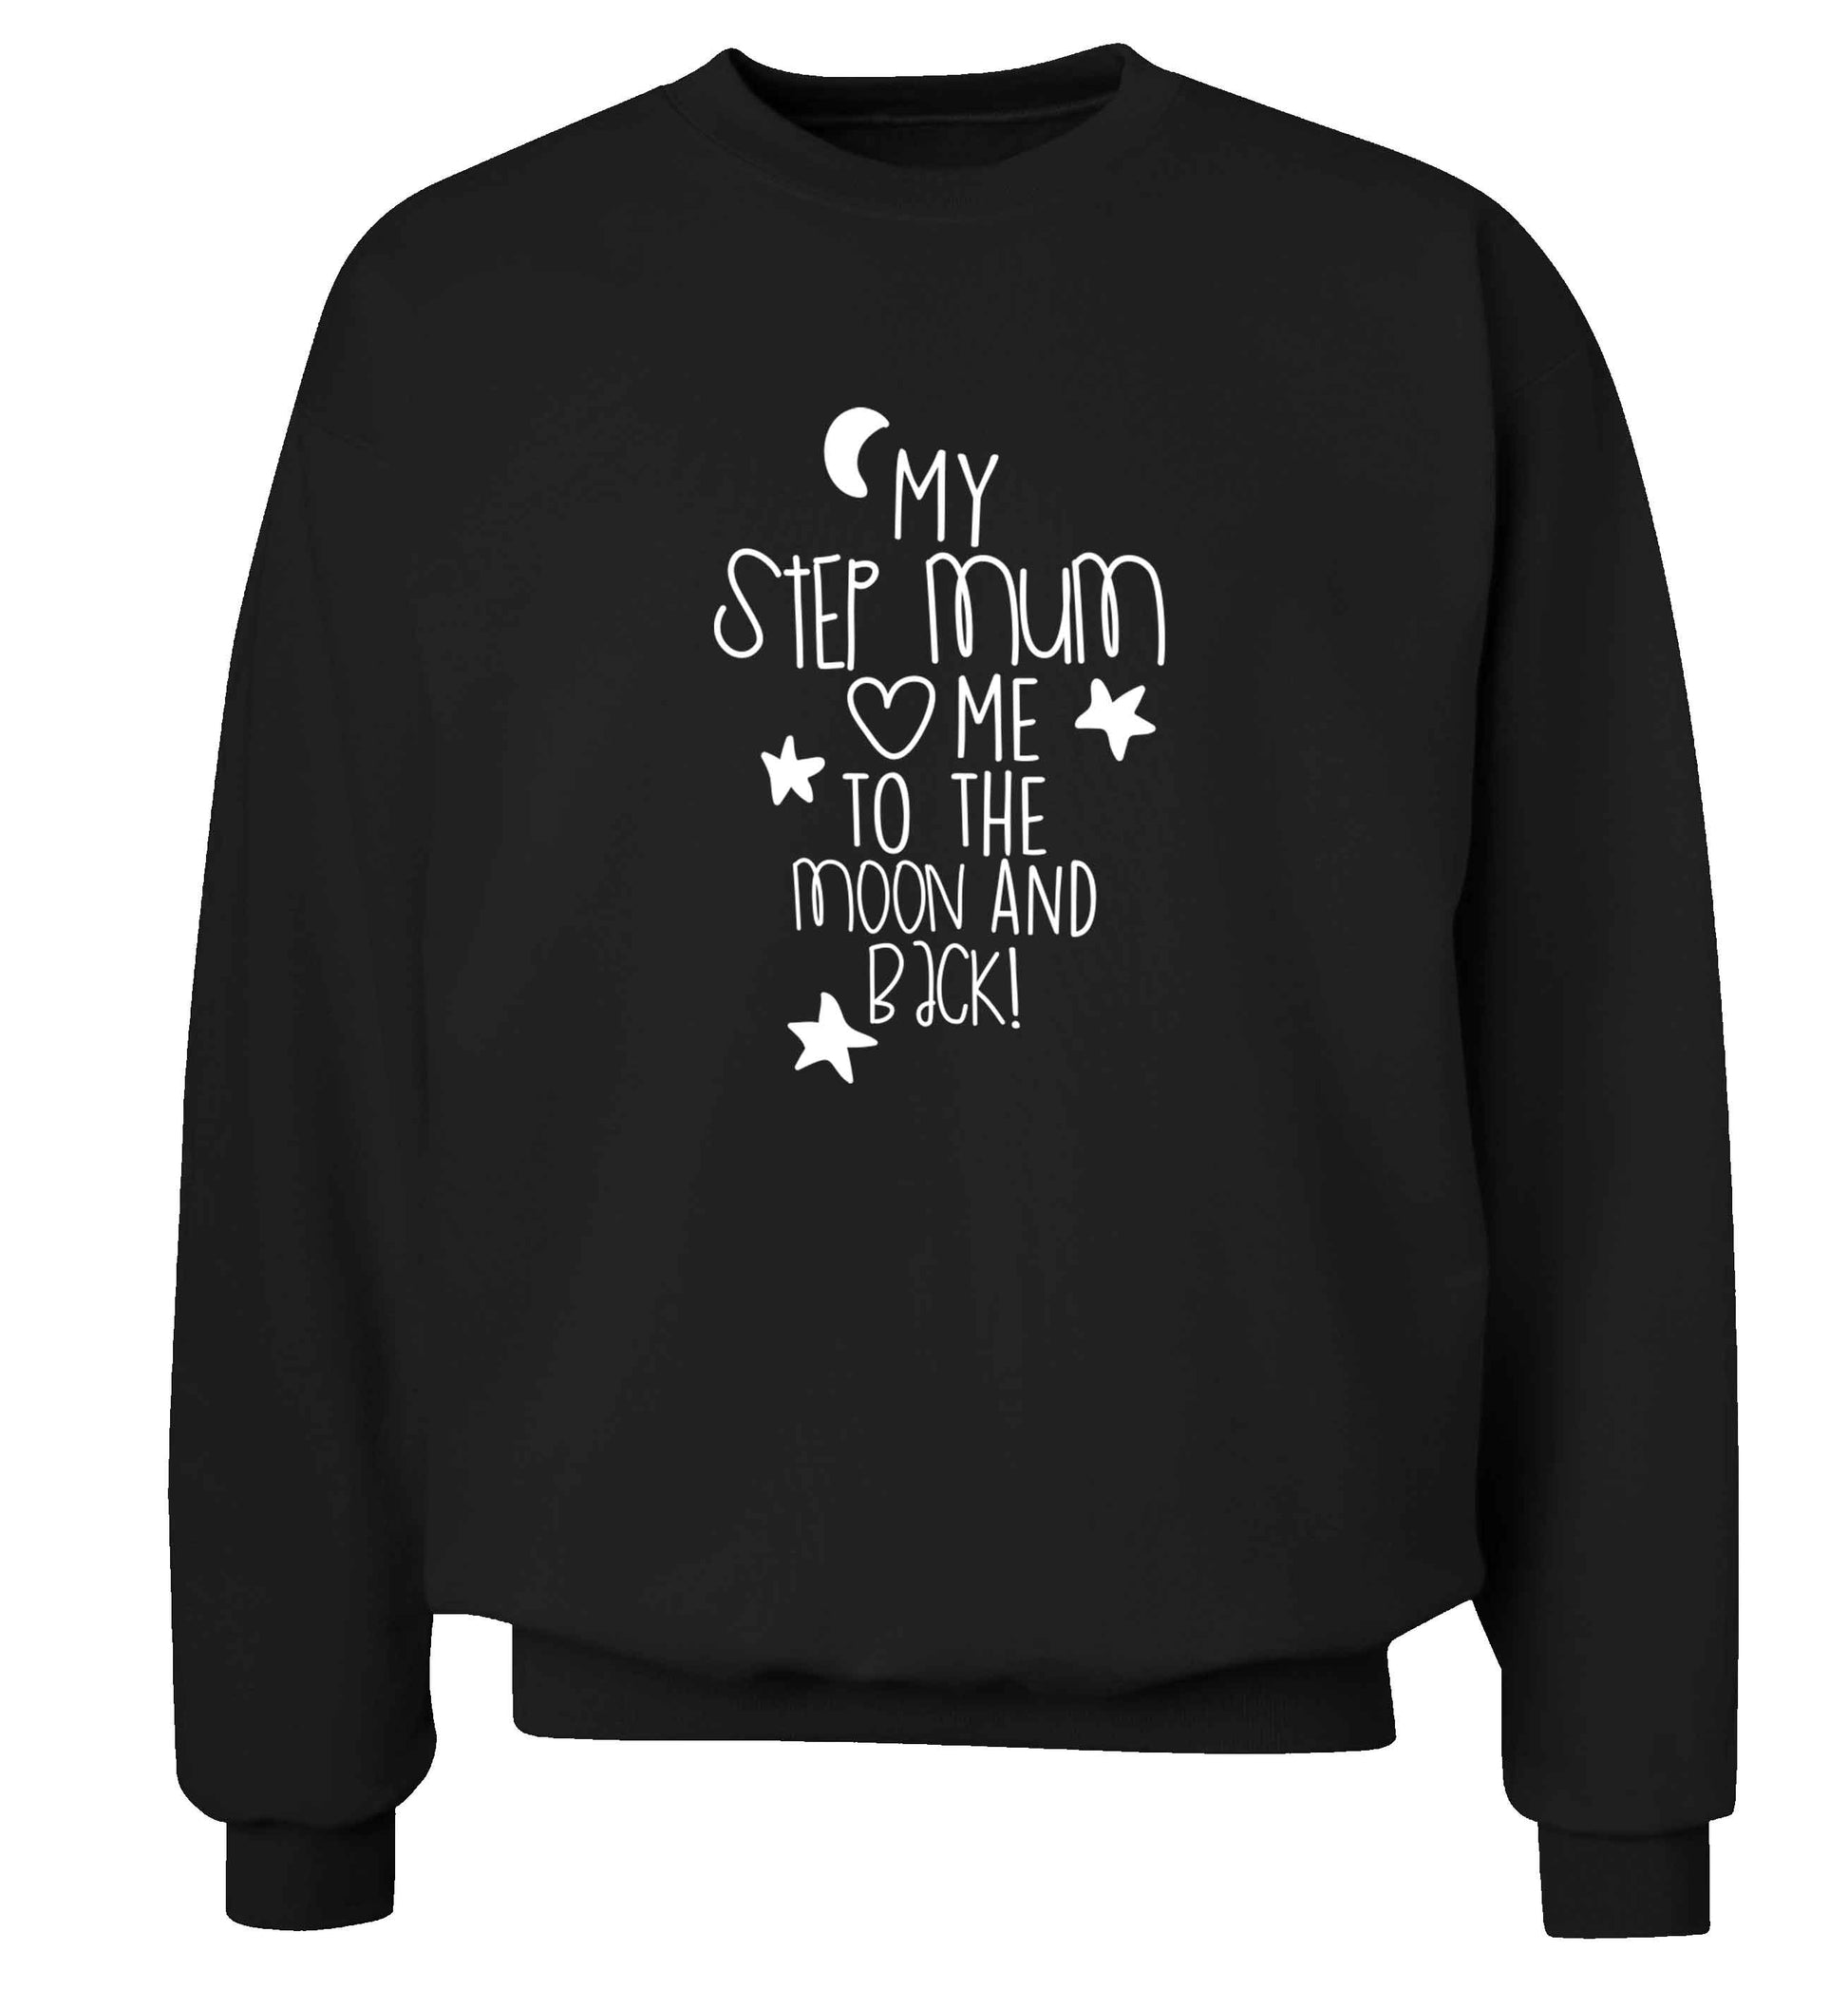 My step-mum loves me to the moon and back adult's unisex black sweater 2XL